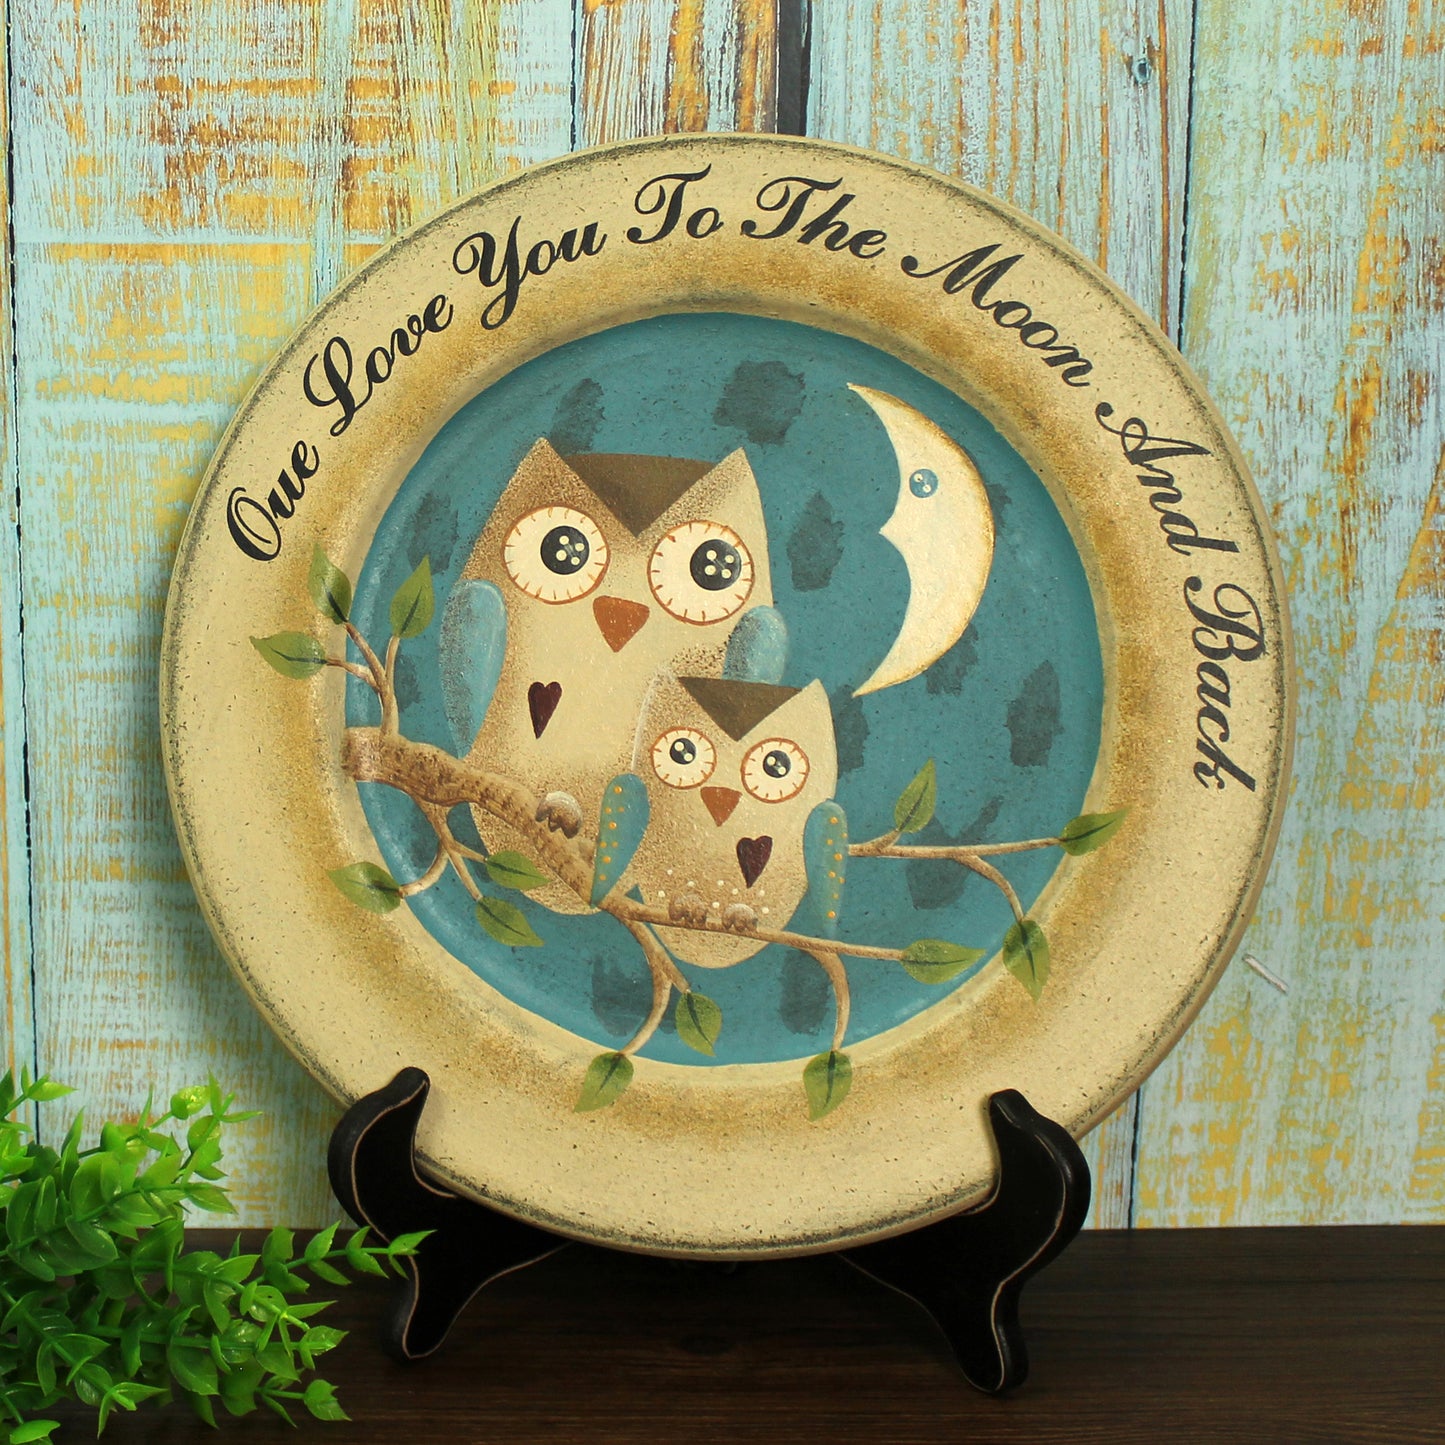 CVHOMEDECO. Primitives Distressed “Our Love You To The Moon And Back”Decorative Plate Round Display Wooden Plate Home Décor Art, 11.25 Inch